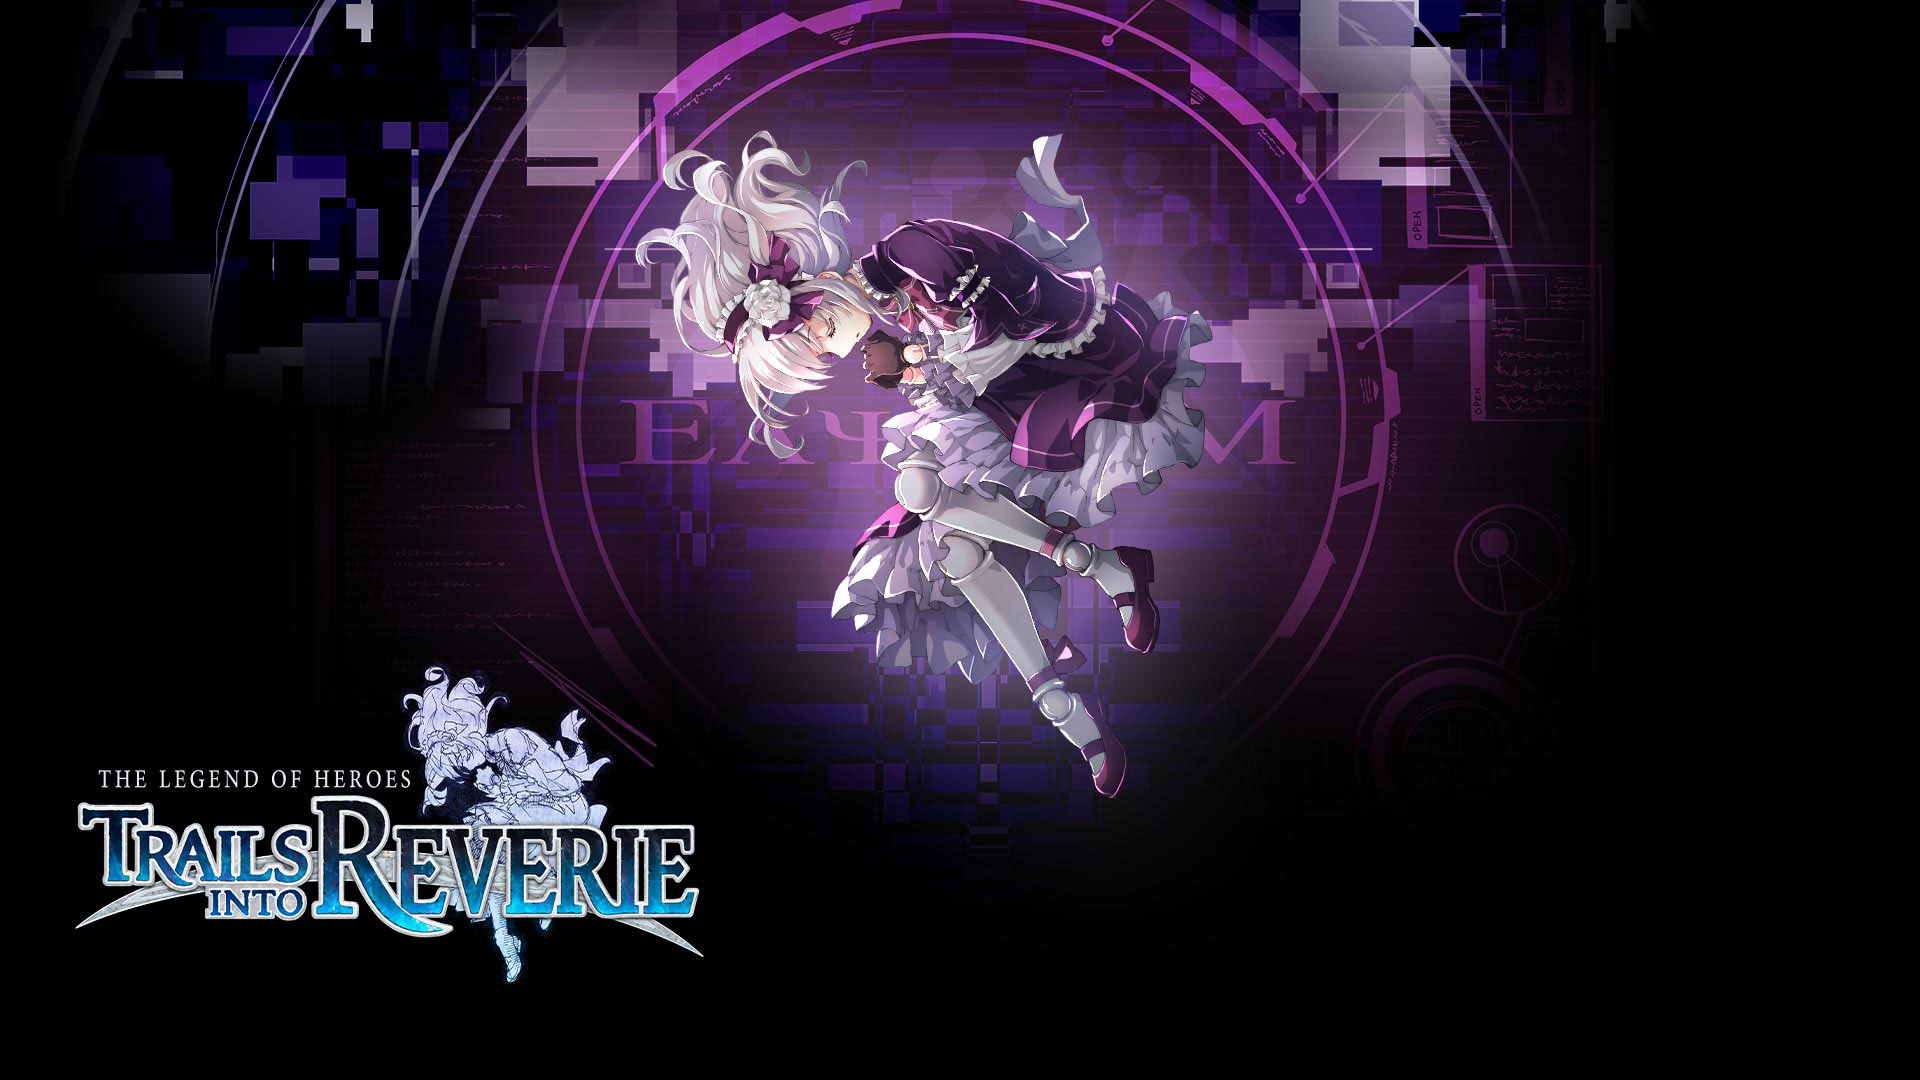 The key art of Trails into Reverie, featuring the character Lapis